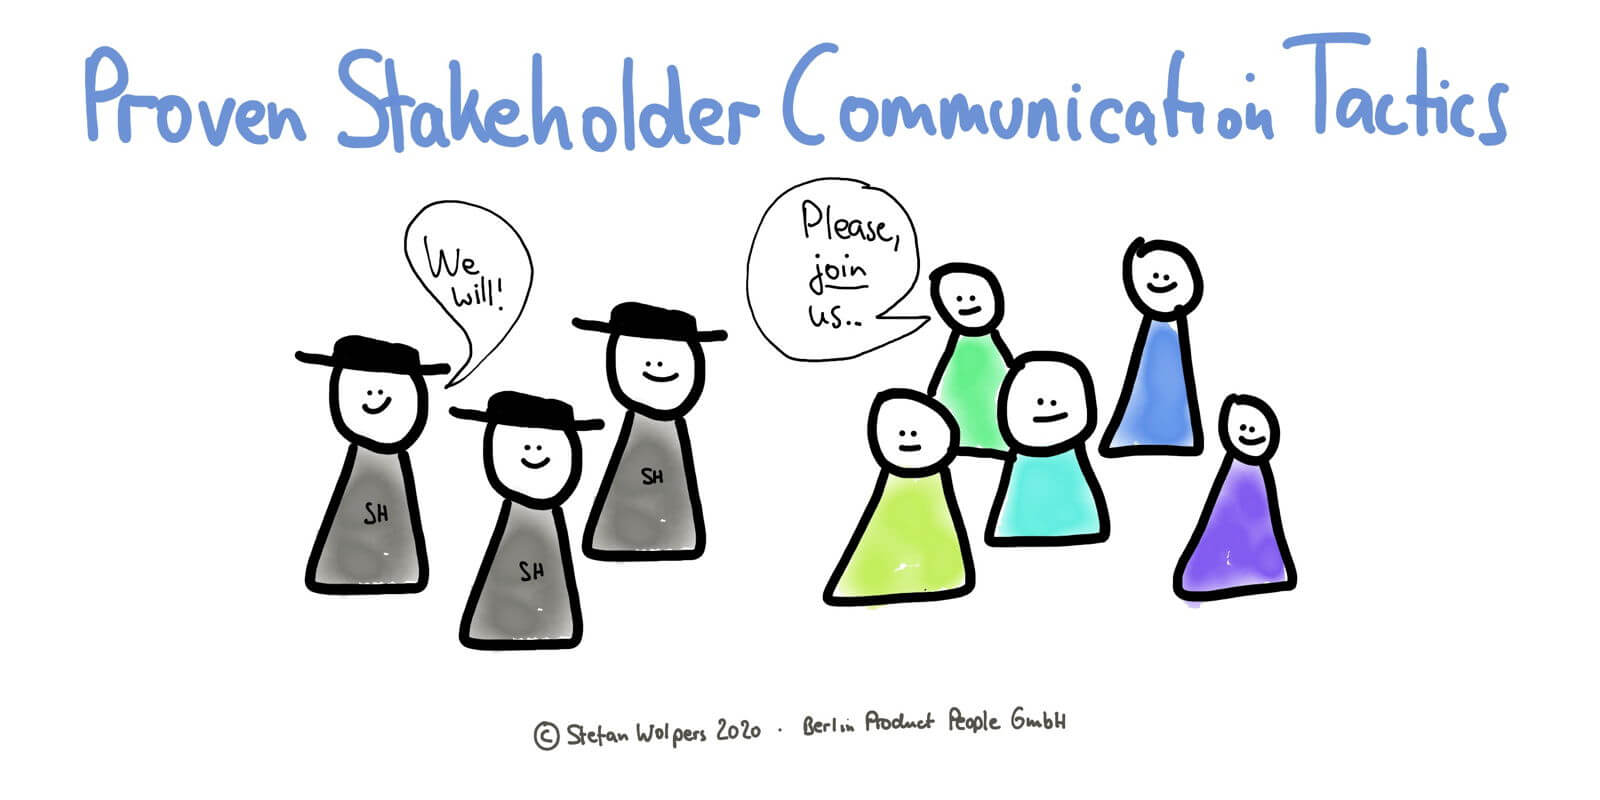 11 Proven Stakeholder Communication Tactics during an Agile Transition — Age-of-Product.com